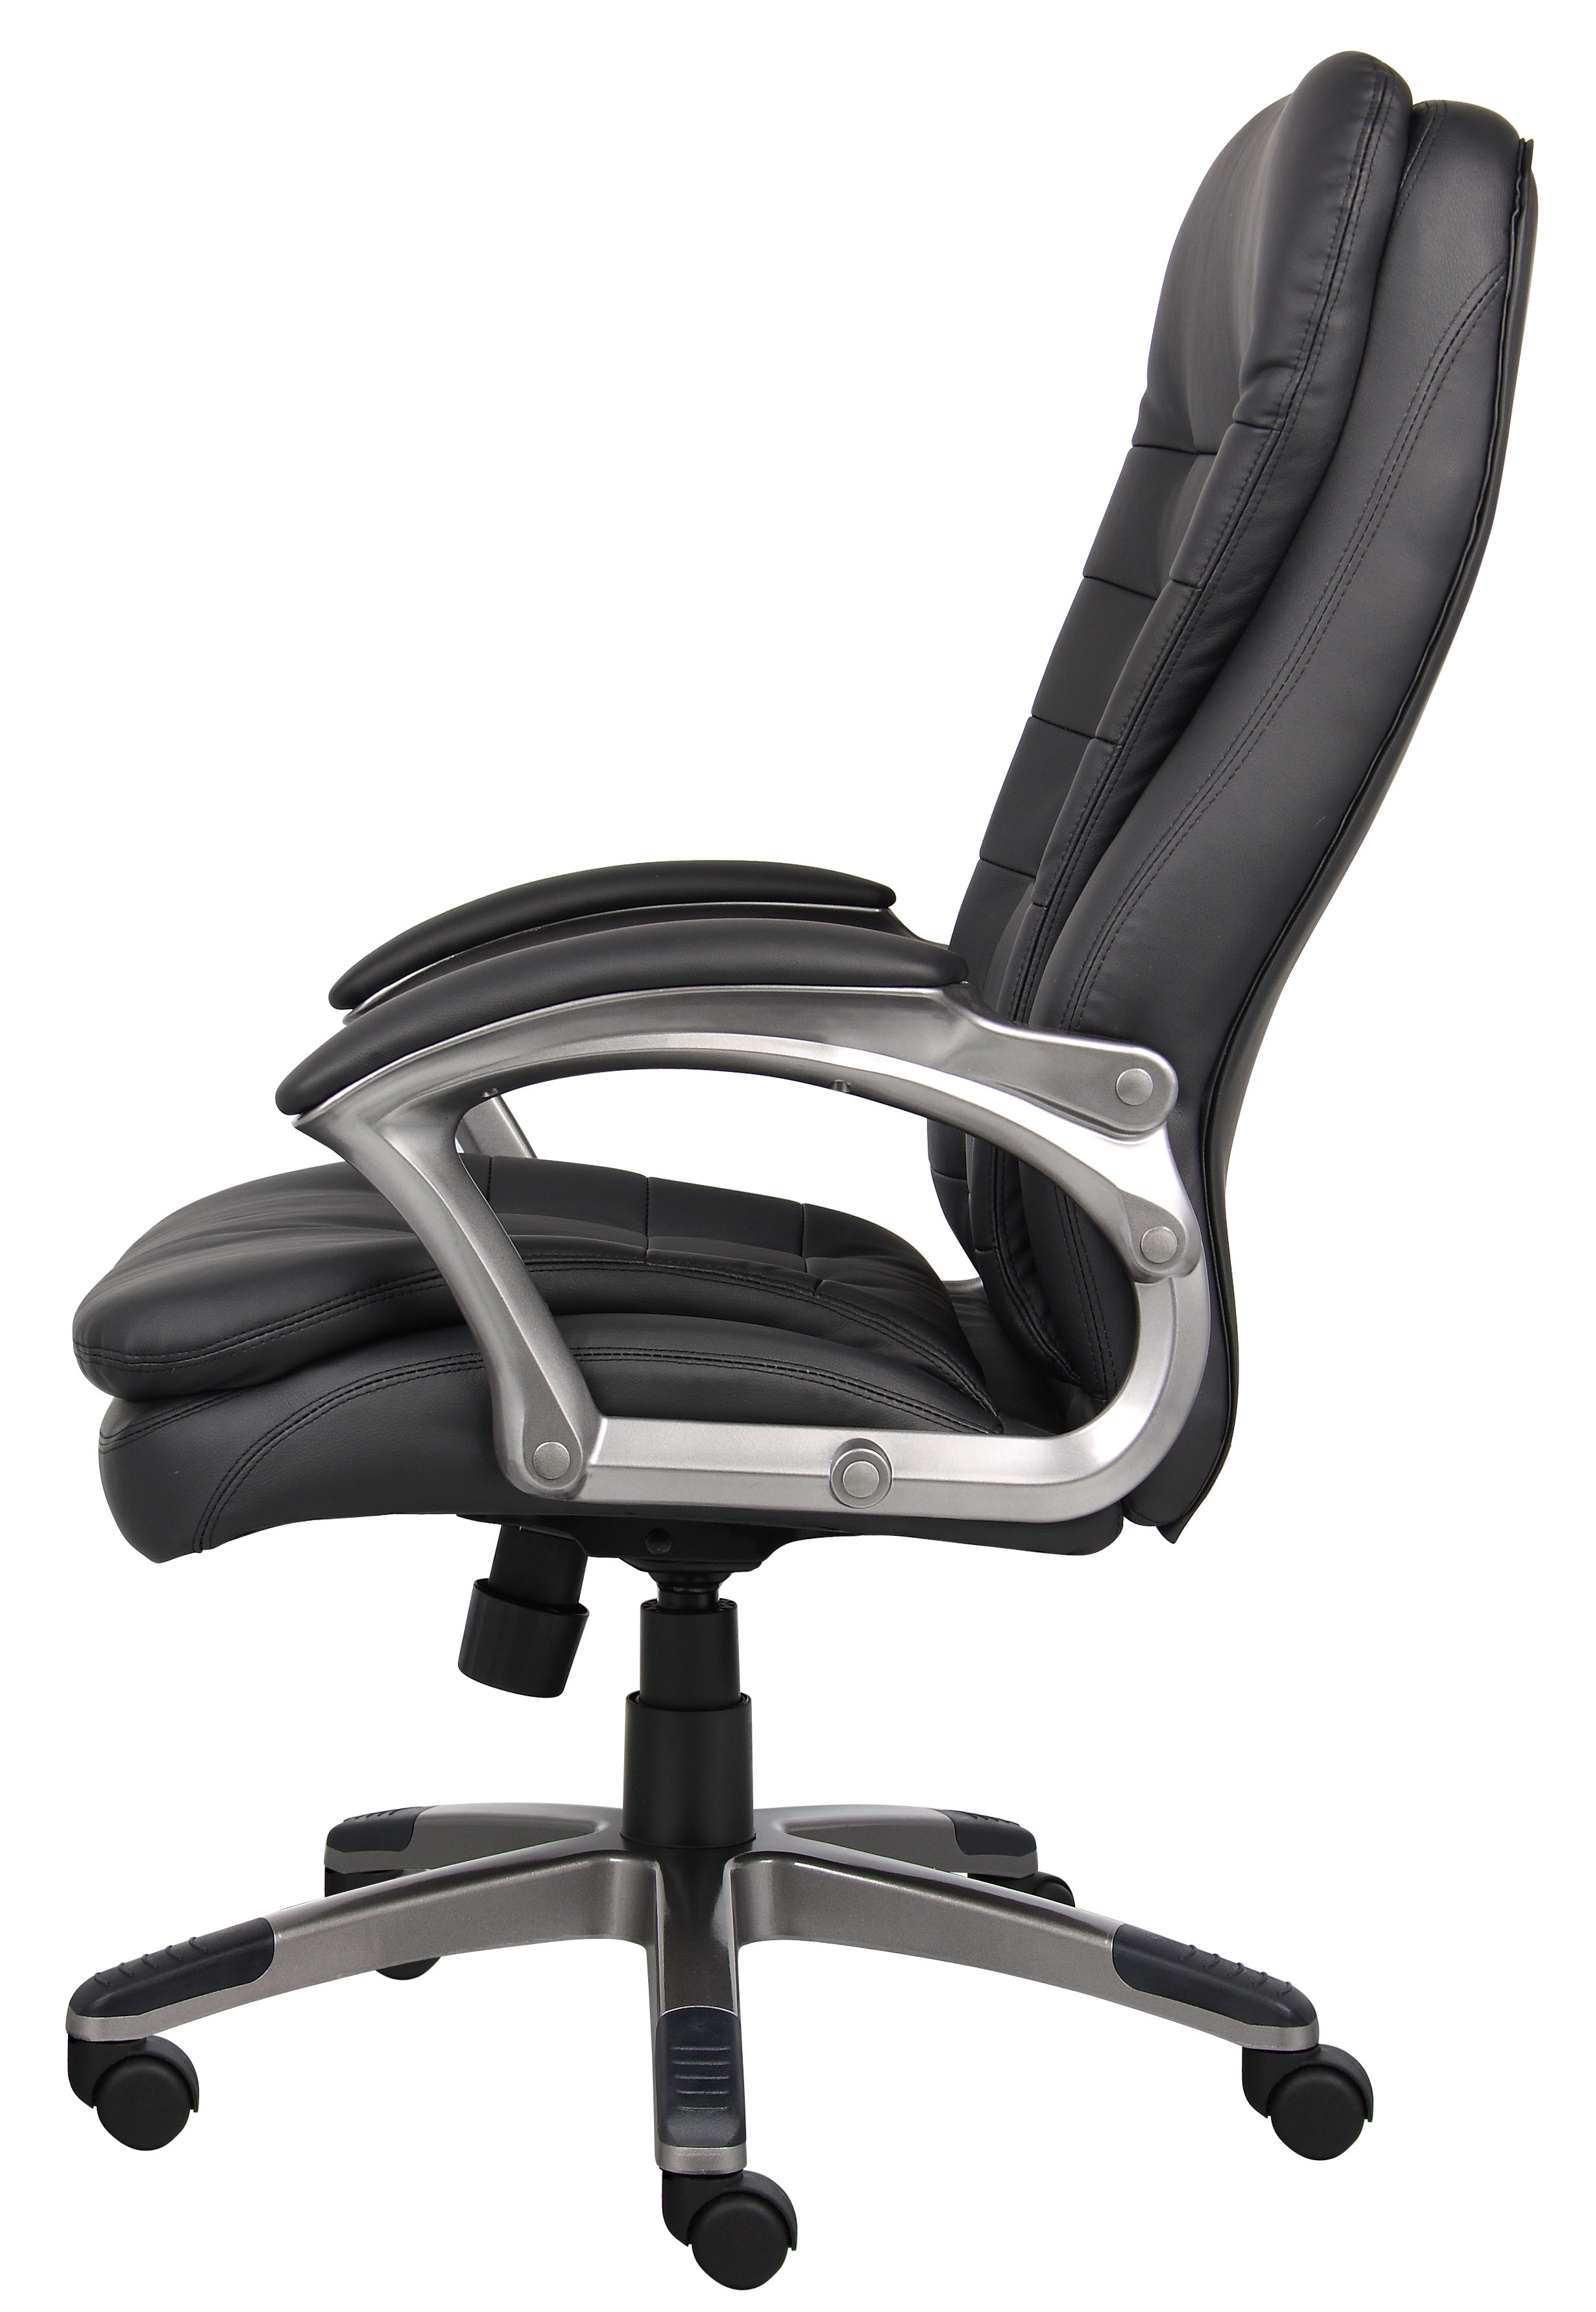 Boss Office Products Executive High Back Pillow Top Office Chair in Black - image 5 of 9